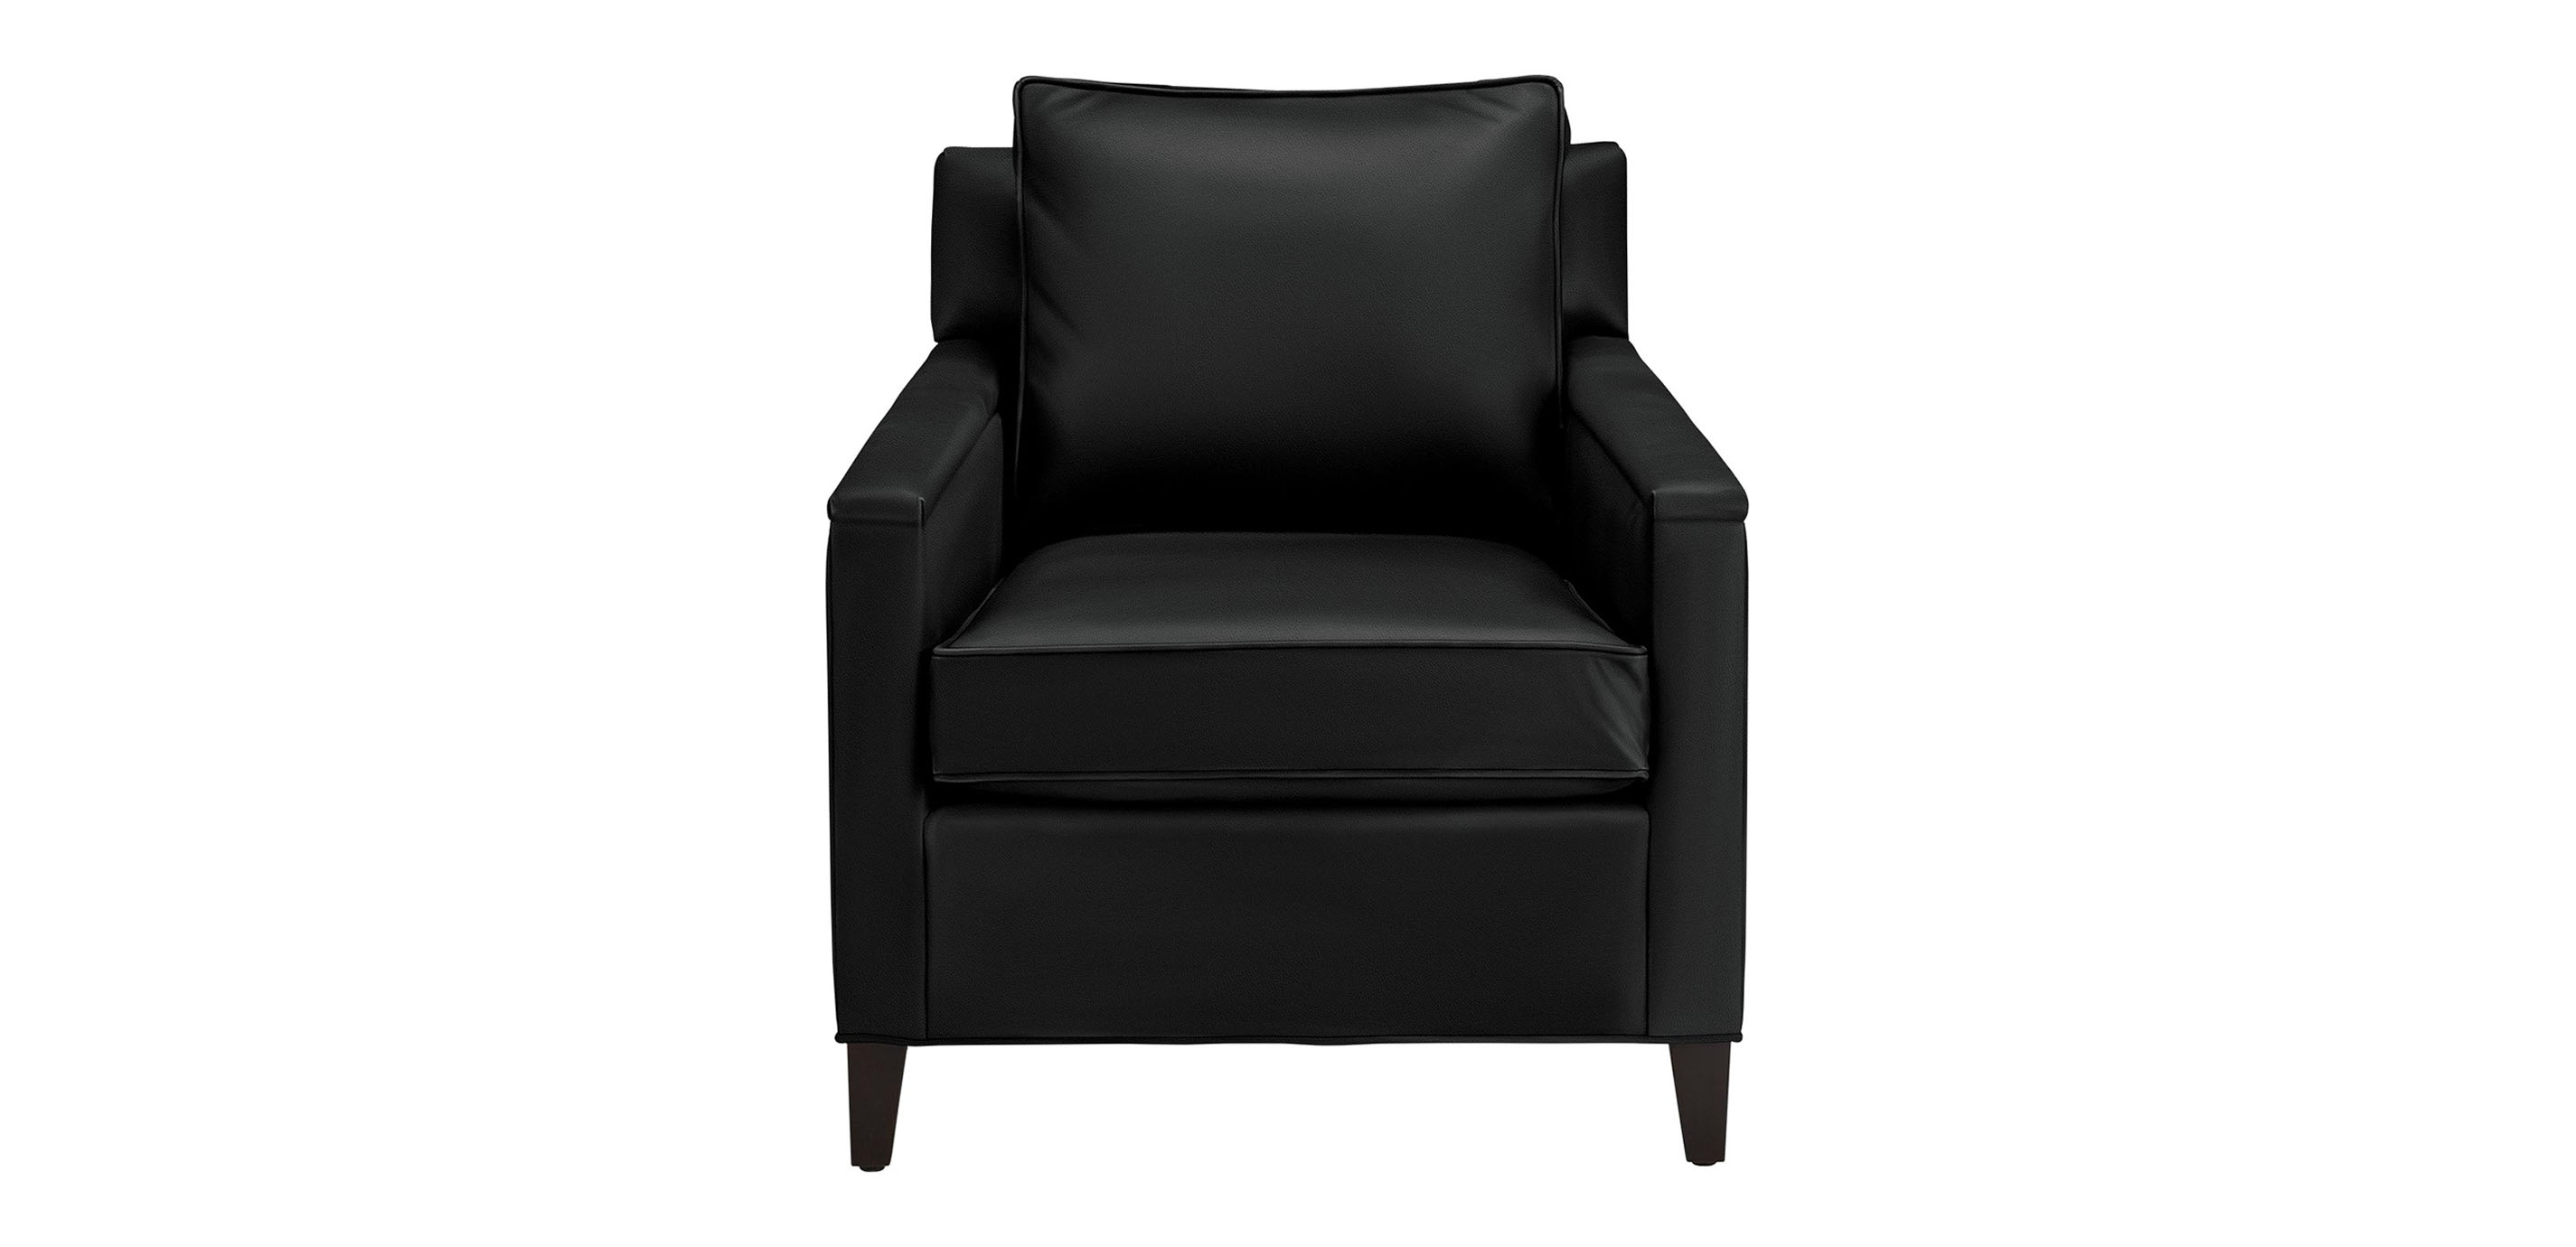 Glen Small Leather Chair Loose Back, Small Black Leather Recliner